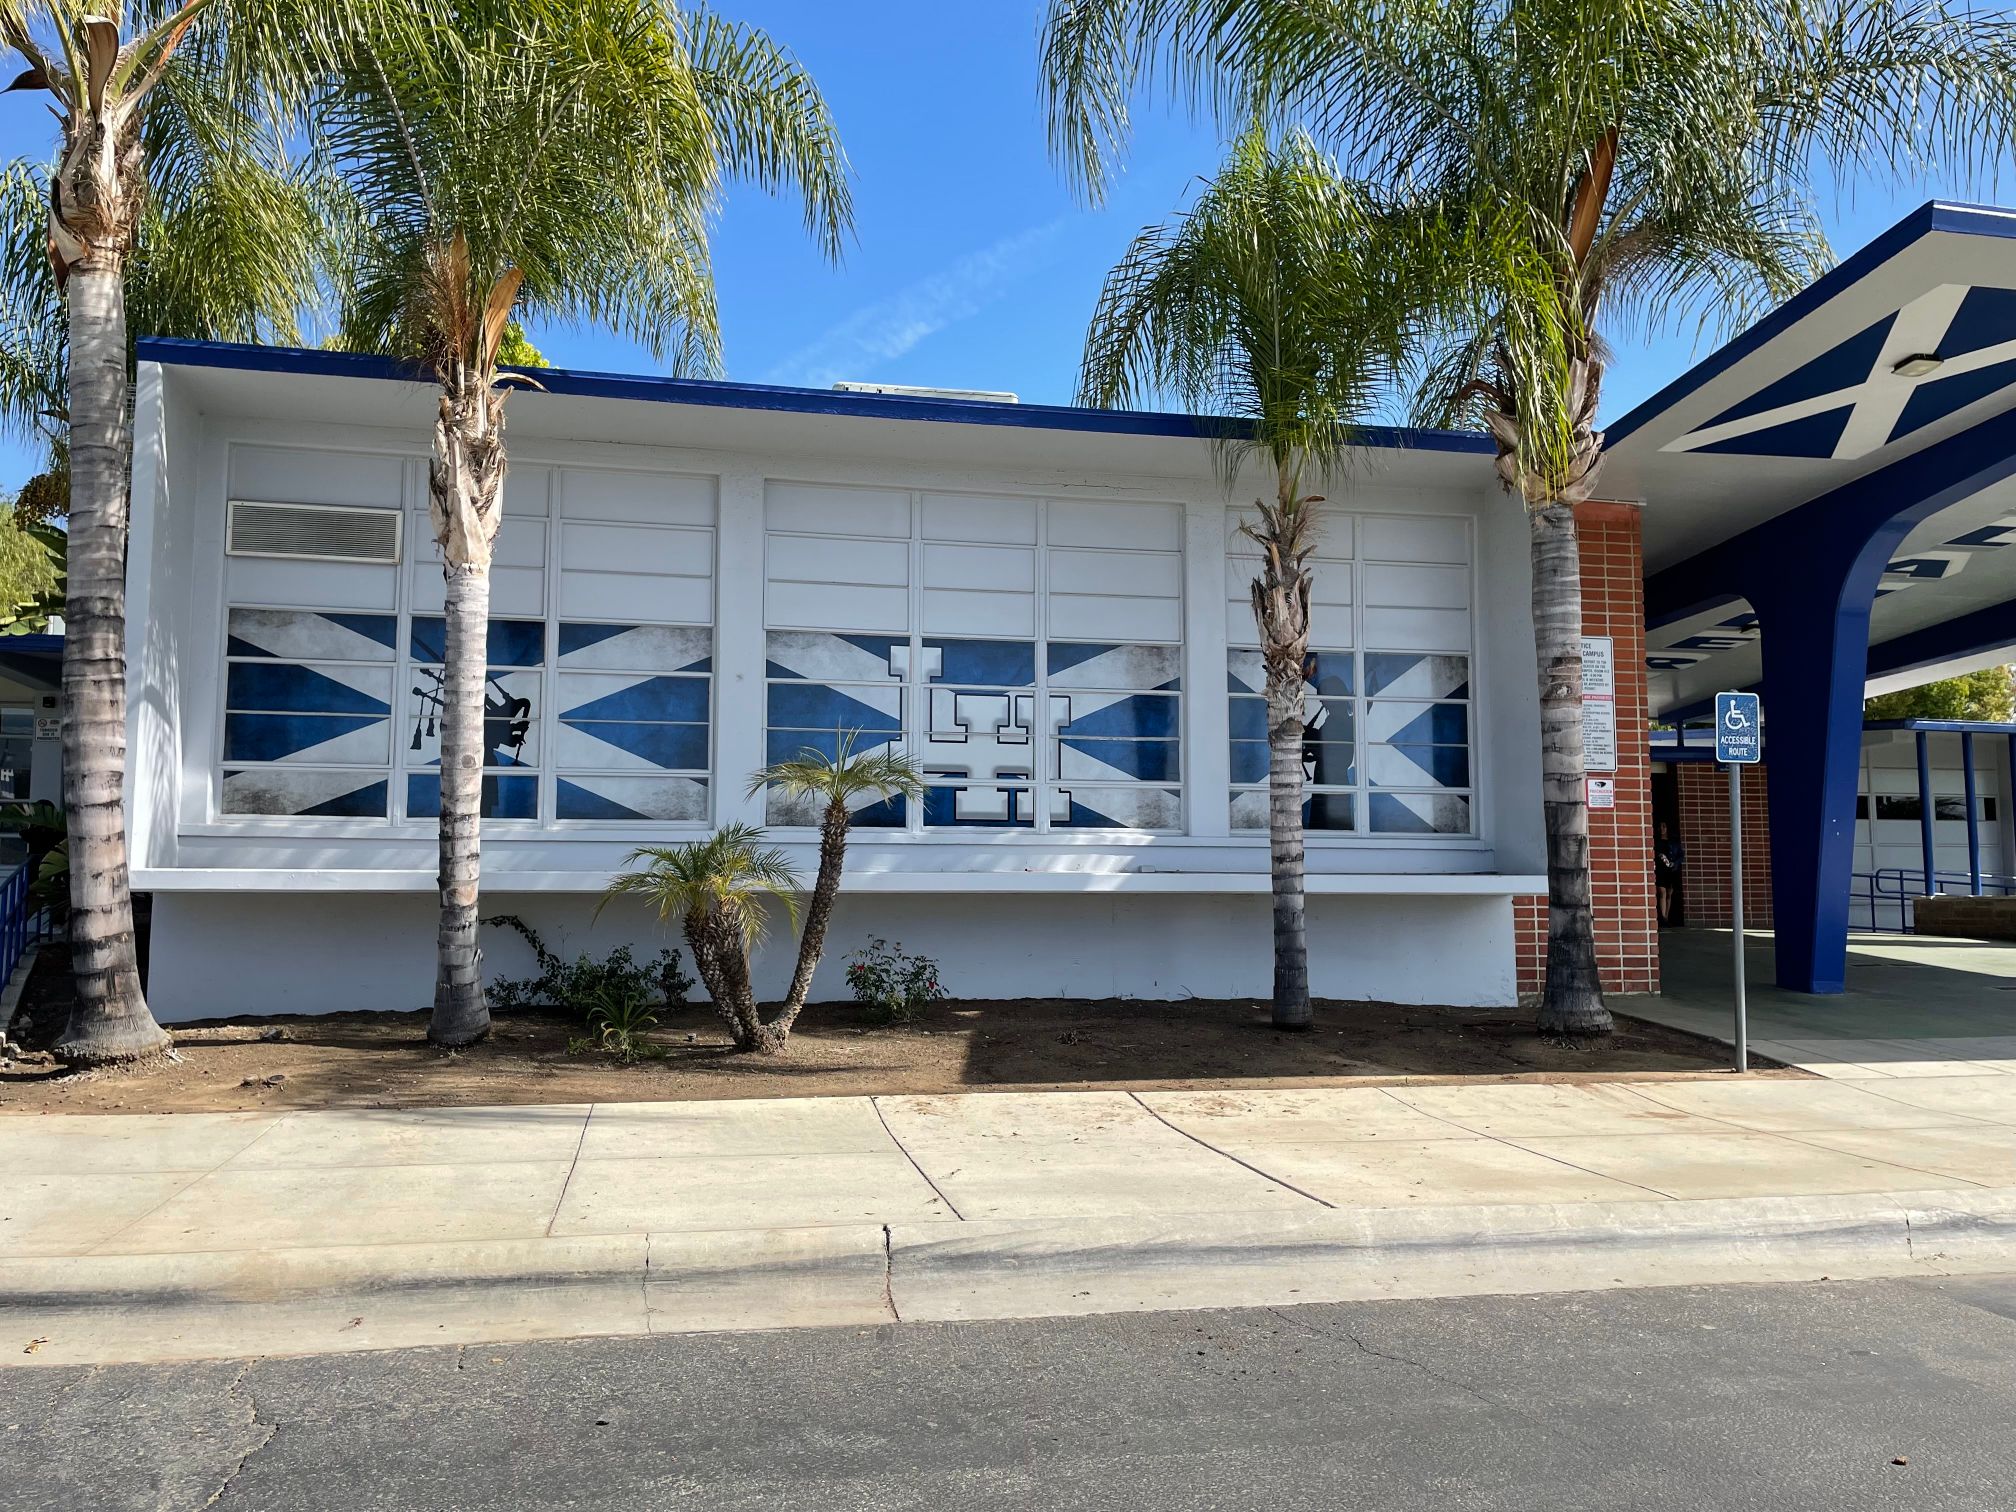 Perforated Window Graphics Welcome Visitors to La Habra High School in Orange County, CA!